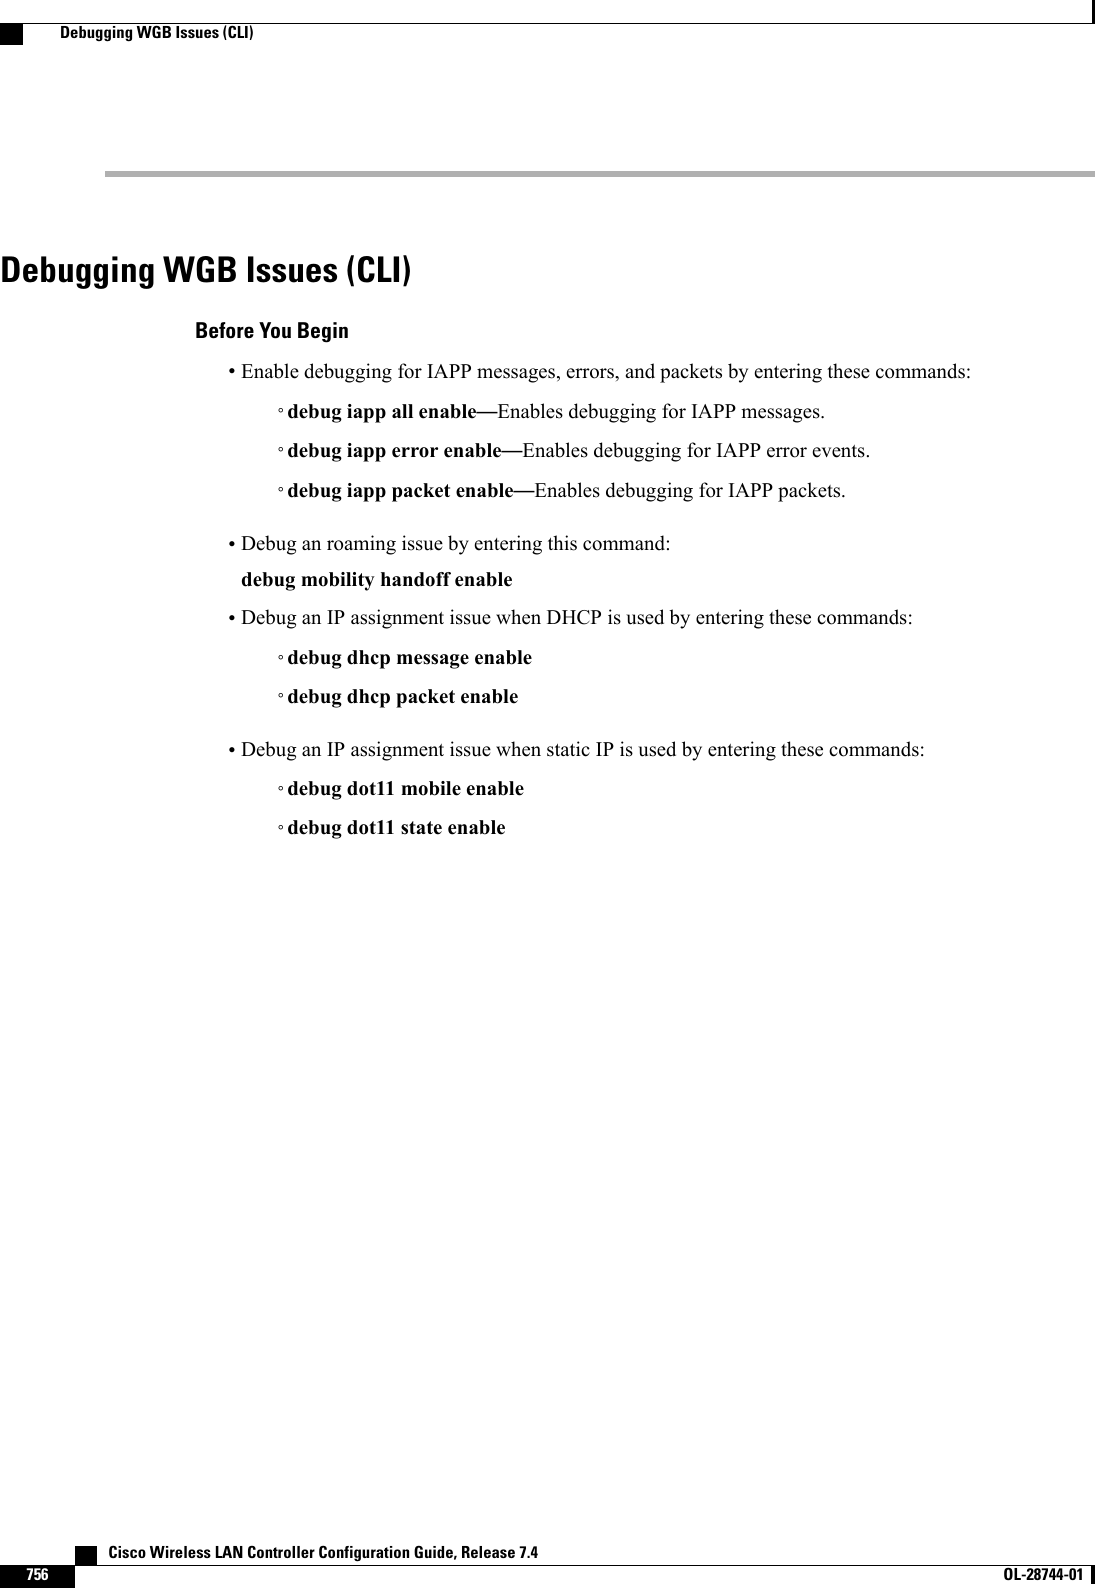 Debugging WGB Issues (CLI)Before You Begin•Enable debugging for IAPP messages, errors, and packets by entering these commands:◦debug iapp all enable—Enables debugging for IAPP messages.◦debug iapp error enable—Enables debugging for IAPP error events.◦debug iapp packet enable—Enables debugging for IAPP packets.•Debug an roaming issue by entering this command:debug mobility handoff enable•Debug an IP assignment issue when DHCP is used by entering these commands:◦debug dhcp message enable◦debug dhcp packet enable•Debug an IP assignment issue when static IP is used by entering these commands:◦debug dot11 mobile enable◦debug dot11 state enable   Cisco Wireless LAN Controller Configuration Guide, Release 7.4756 OL-28744-01  Debugging WGB Issues (CLI)